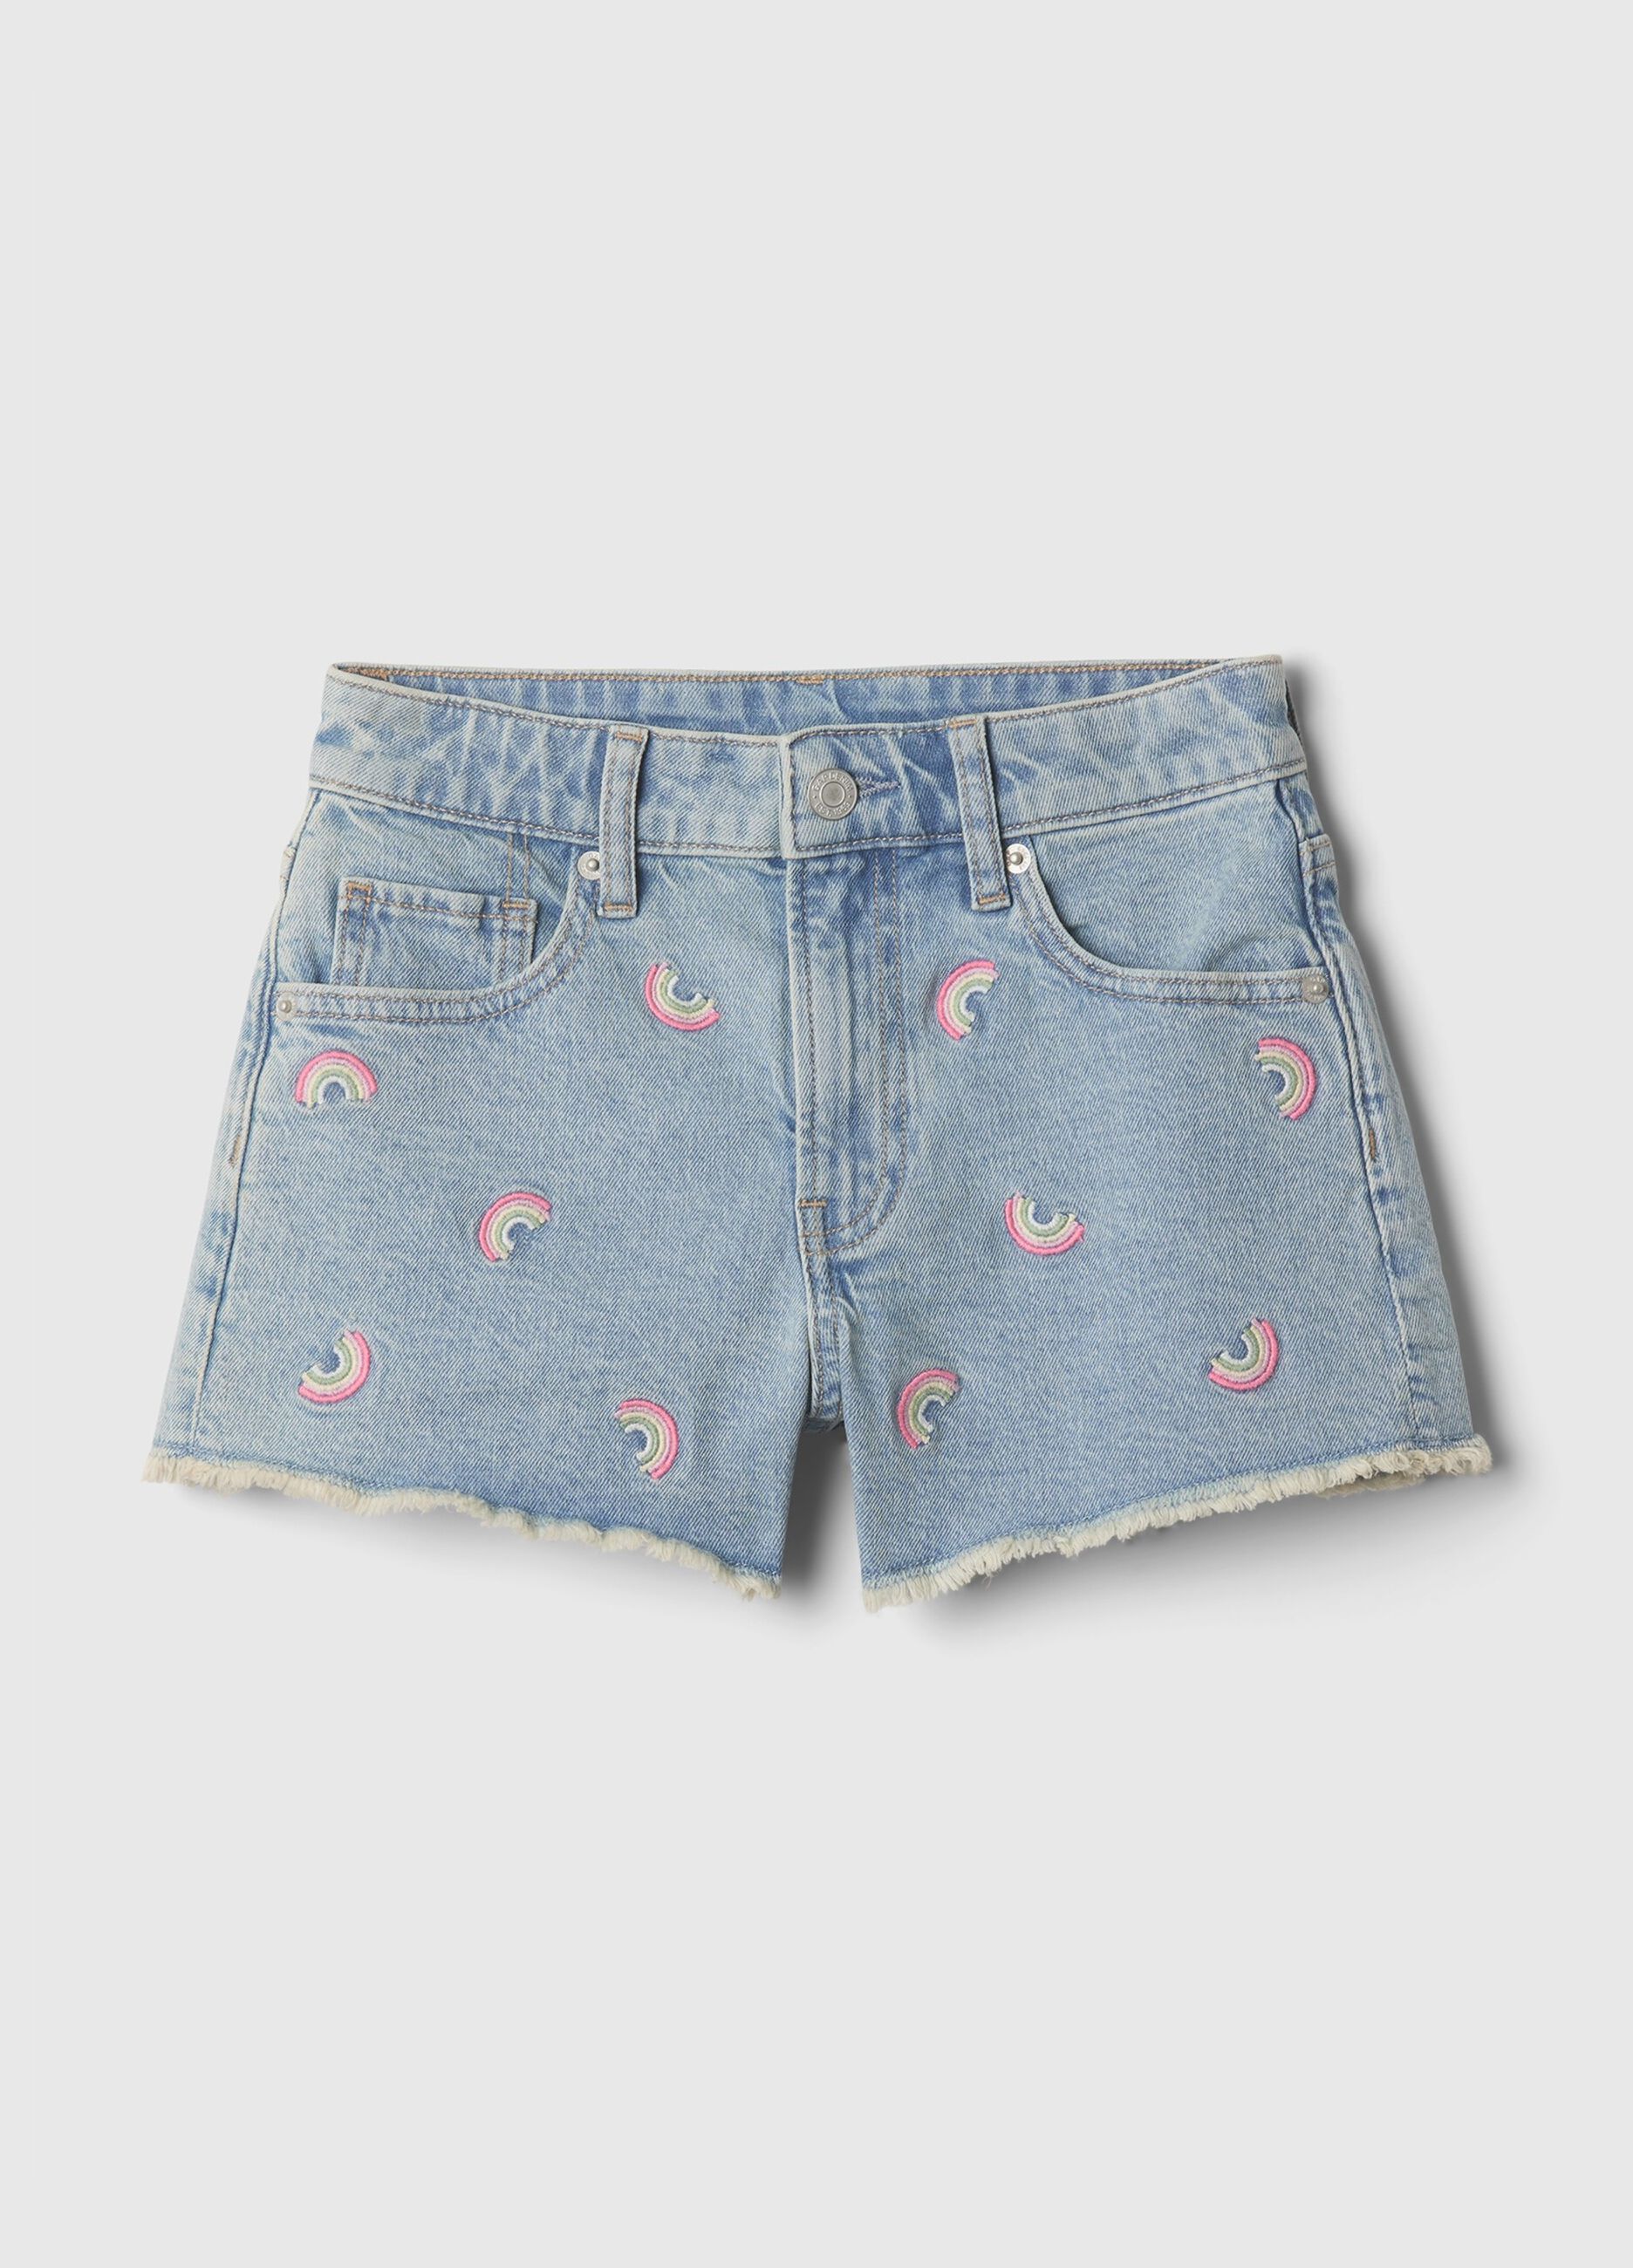 Denim shorts with rainbow embroidery